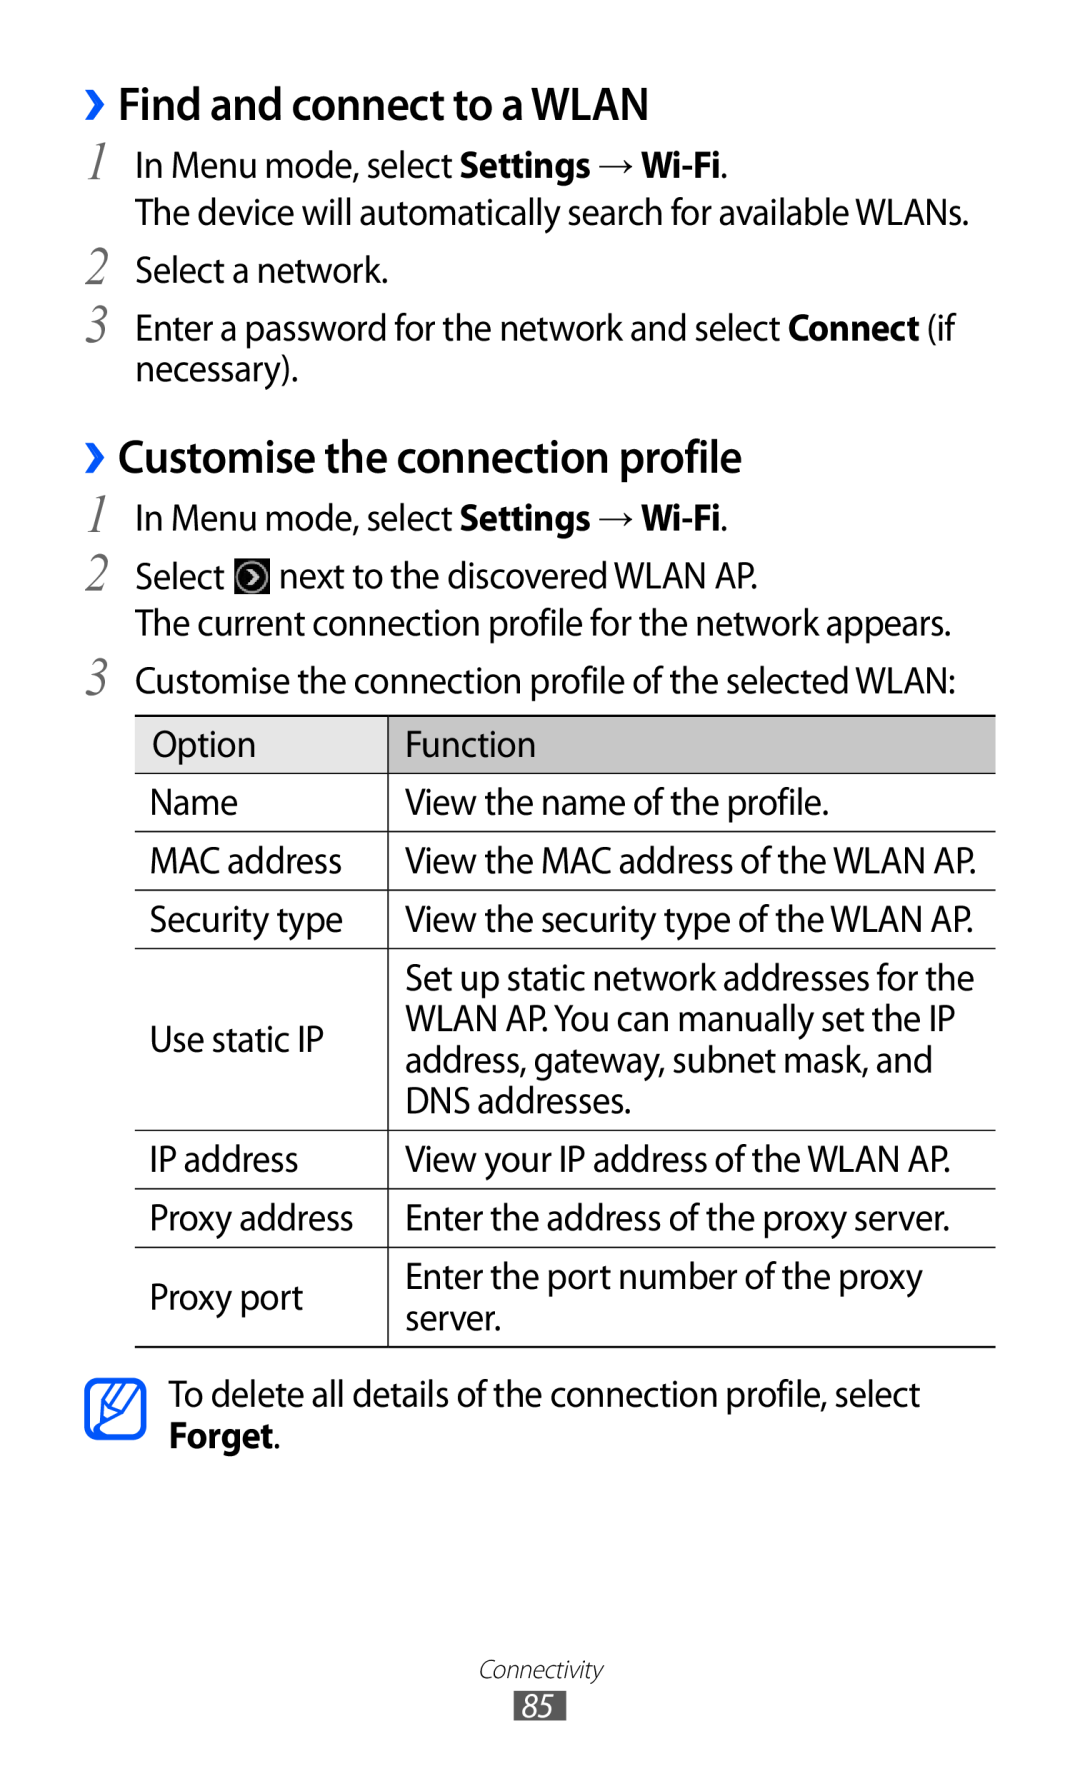 Samsung GT-S5380WRGSEB, GT-S5380SSADBT, GT-S5380WRGDBT ››Find and connect to a WLAN, ››Customise the connection profile 